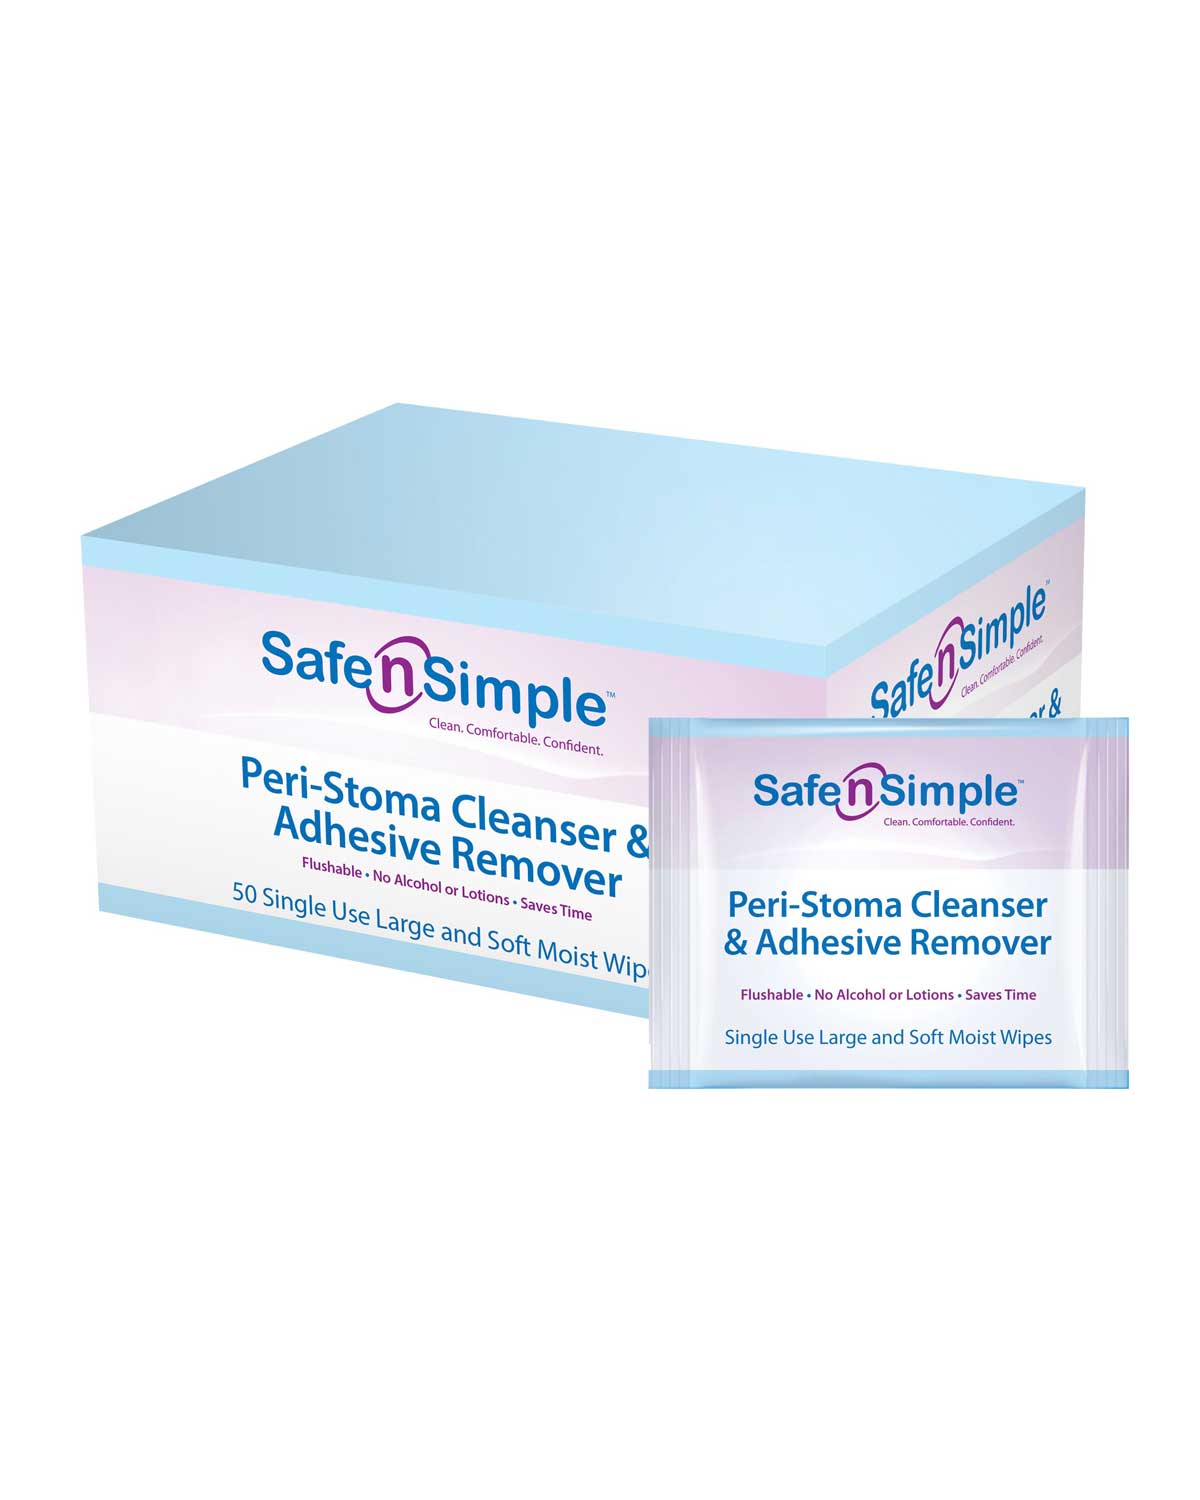 Safe n Simple Peri-Stoma Cleanser & Adhesive Remover, (5 PACKETS/BOX) - 0